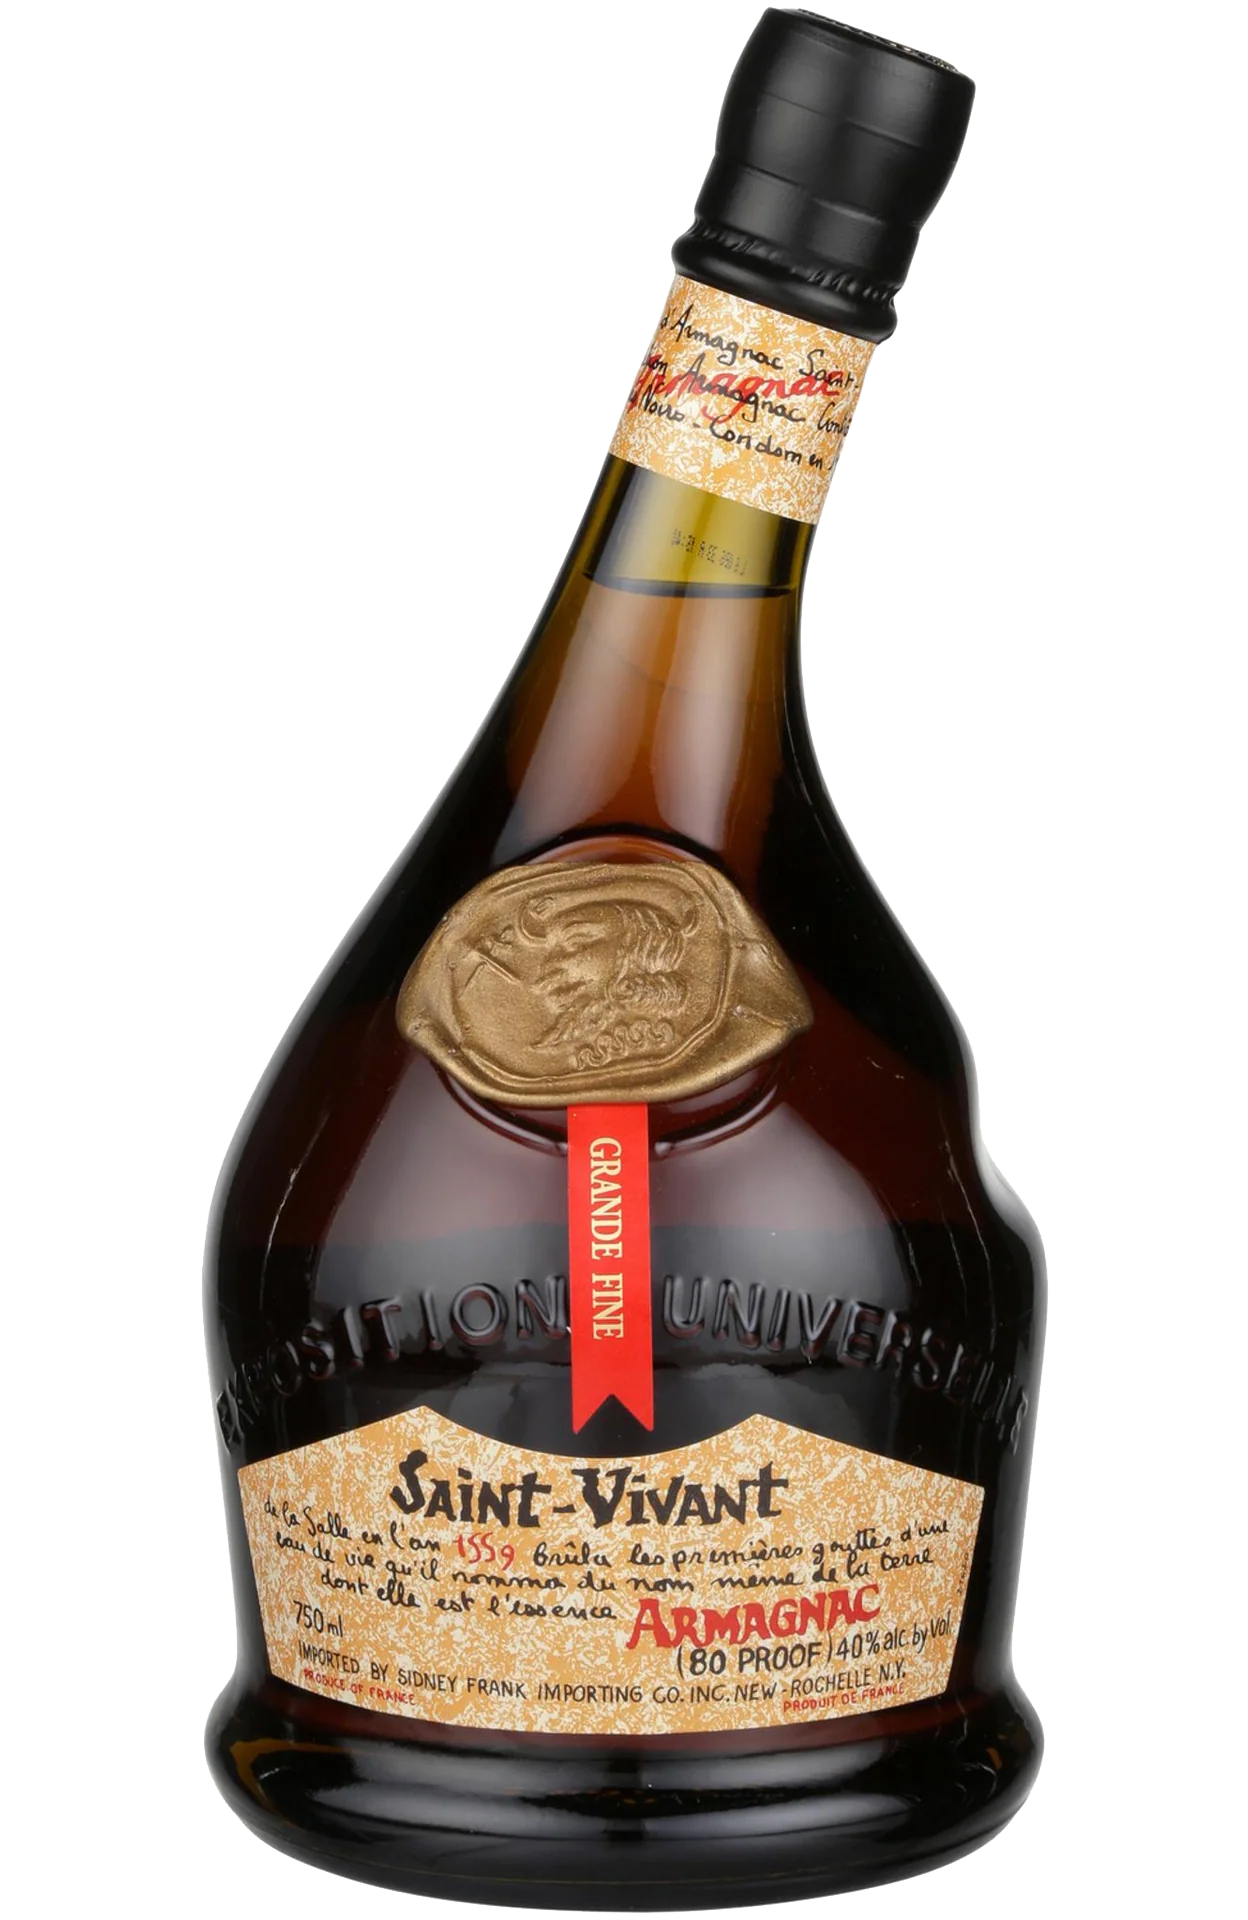 St Vivant Armagnac Grande Fine France 750ml, featuring an elegant bottle with traditional labeling, showcasing the rich, golden hue of the aged Armagnac within.